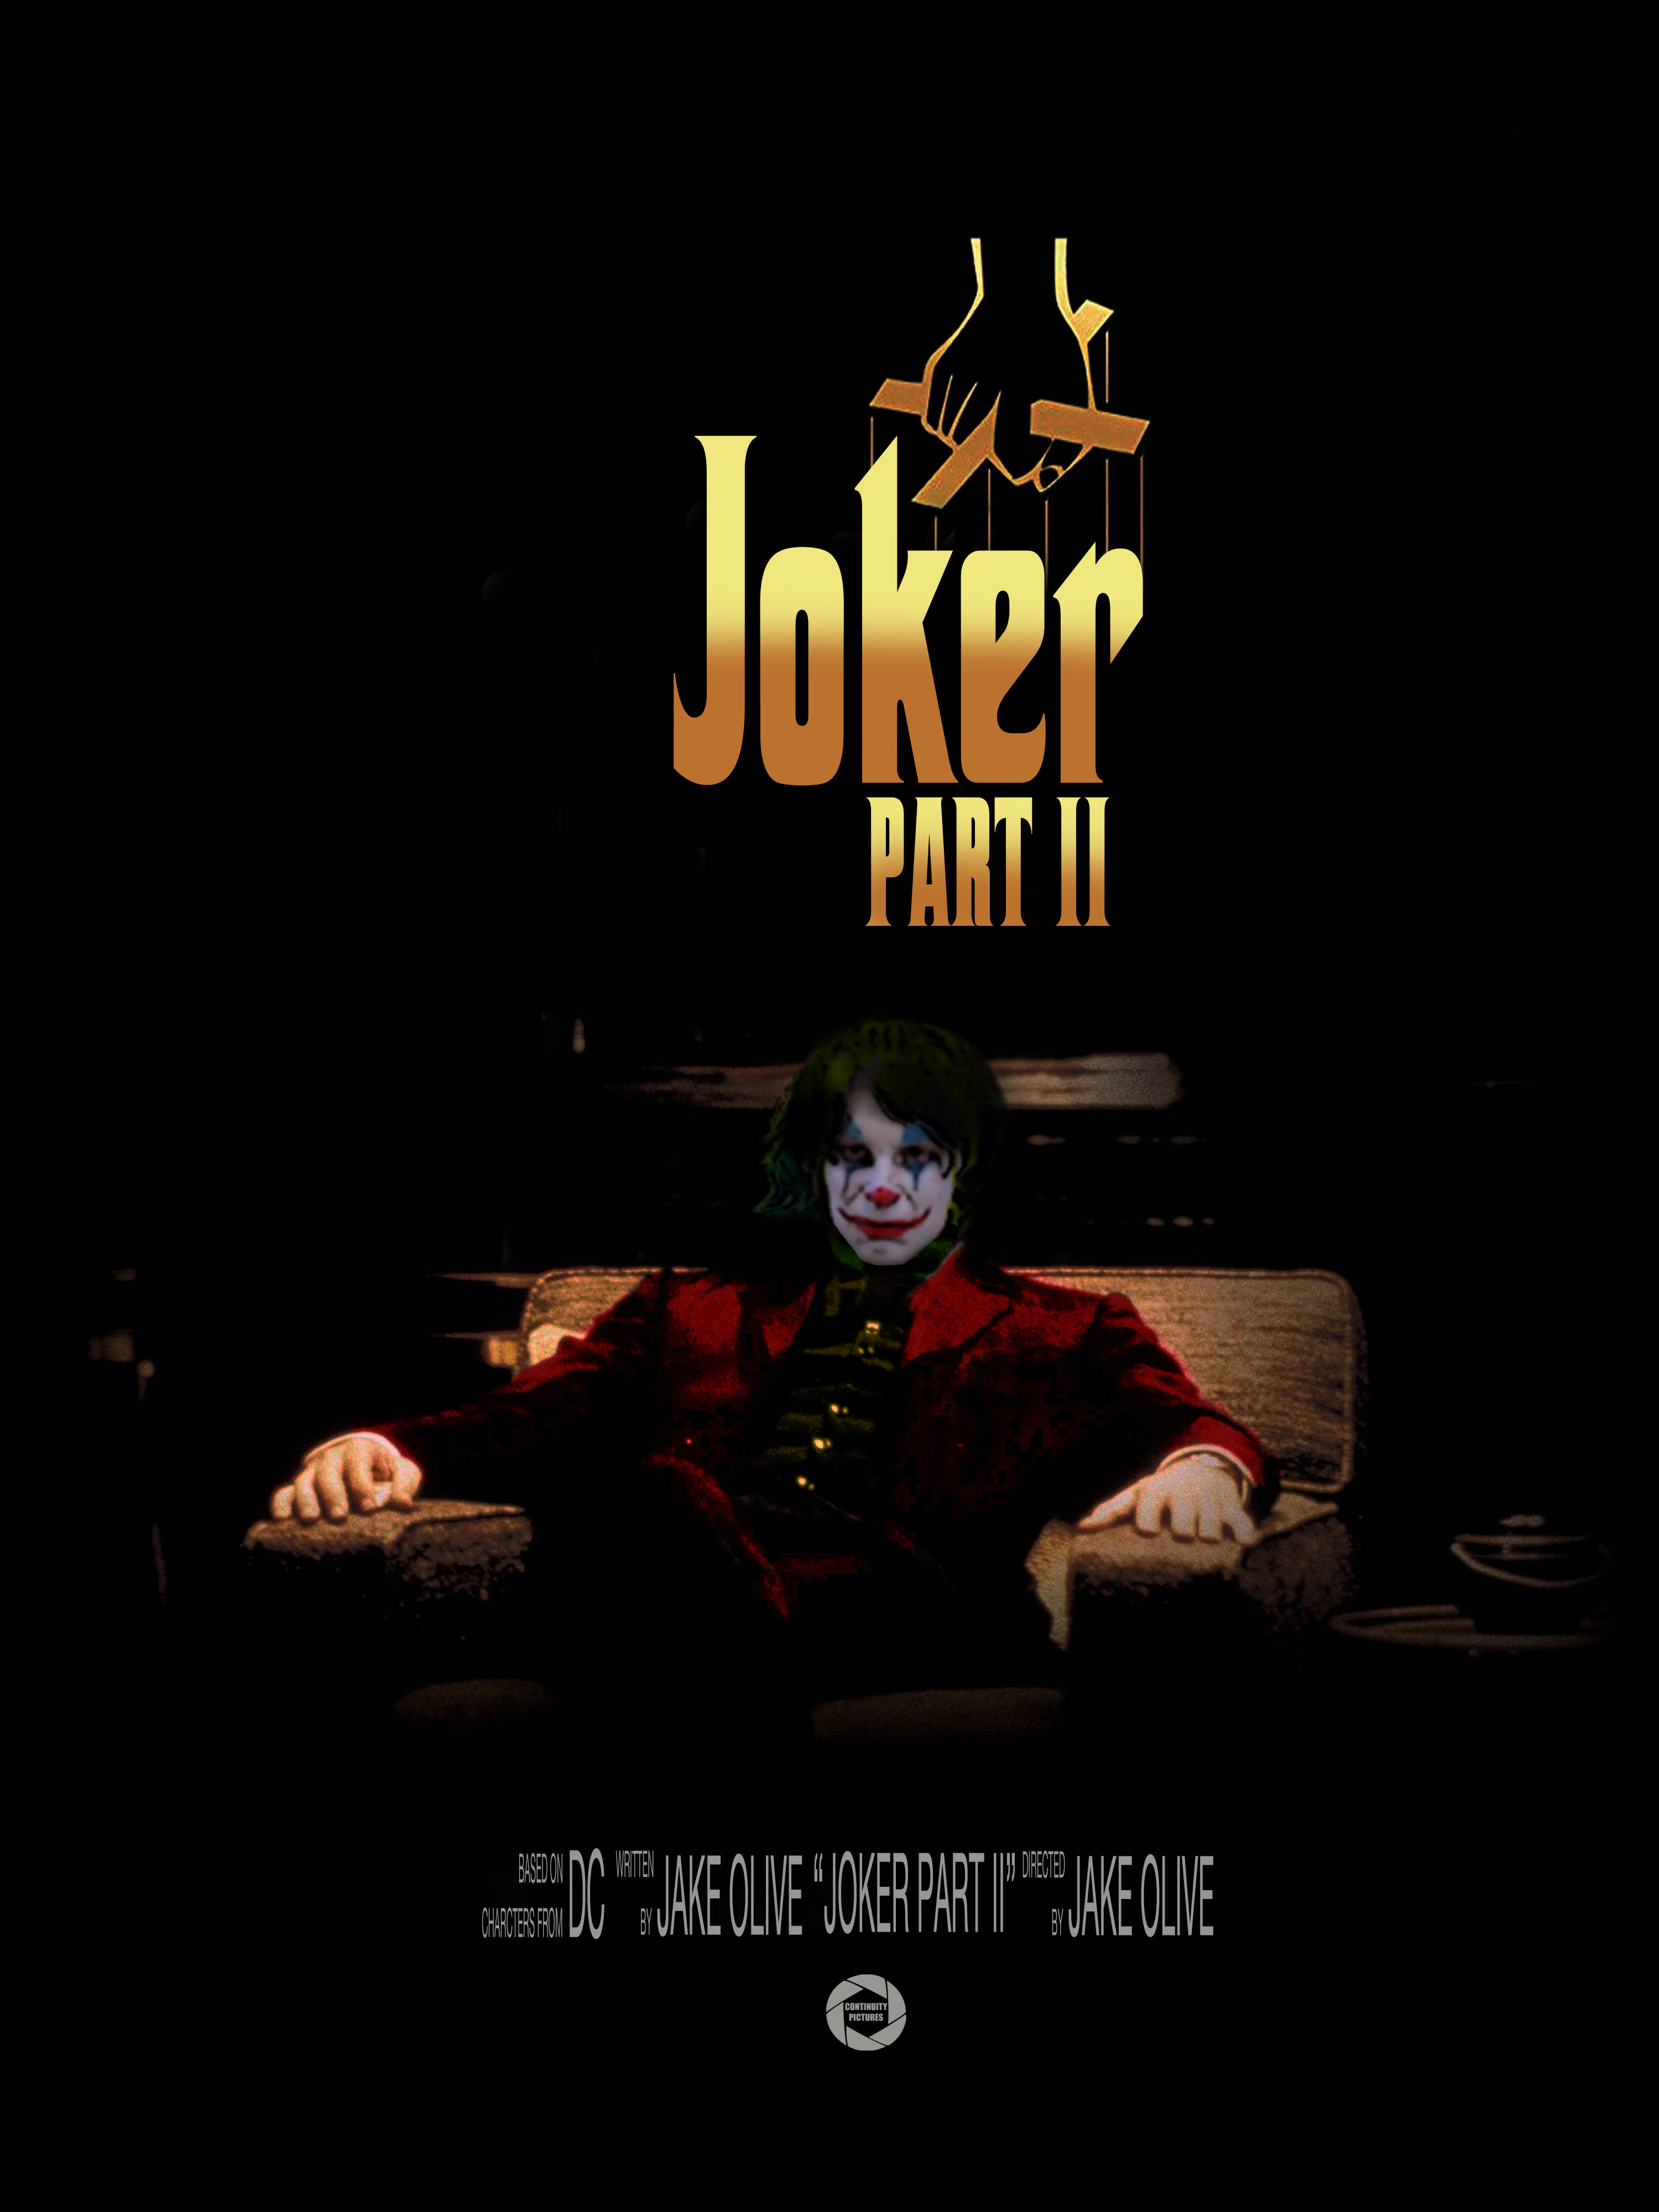 atifa khan recommends joker tamil movie download pic